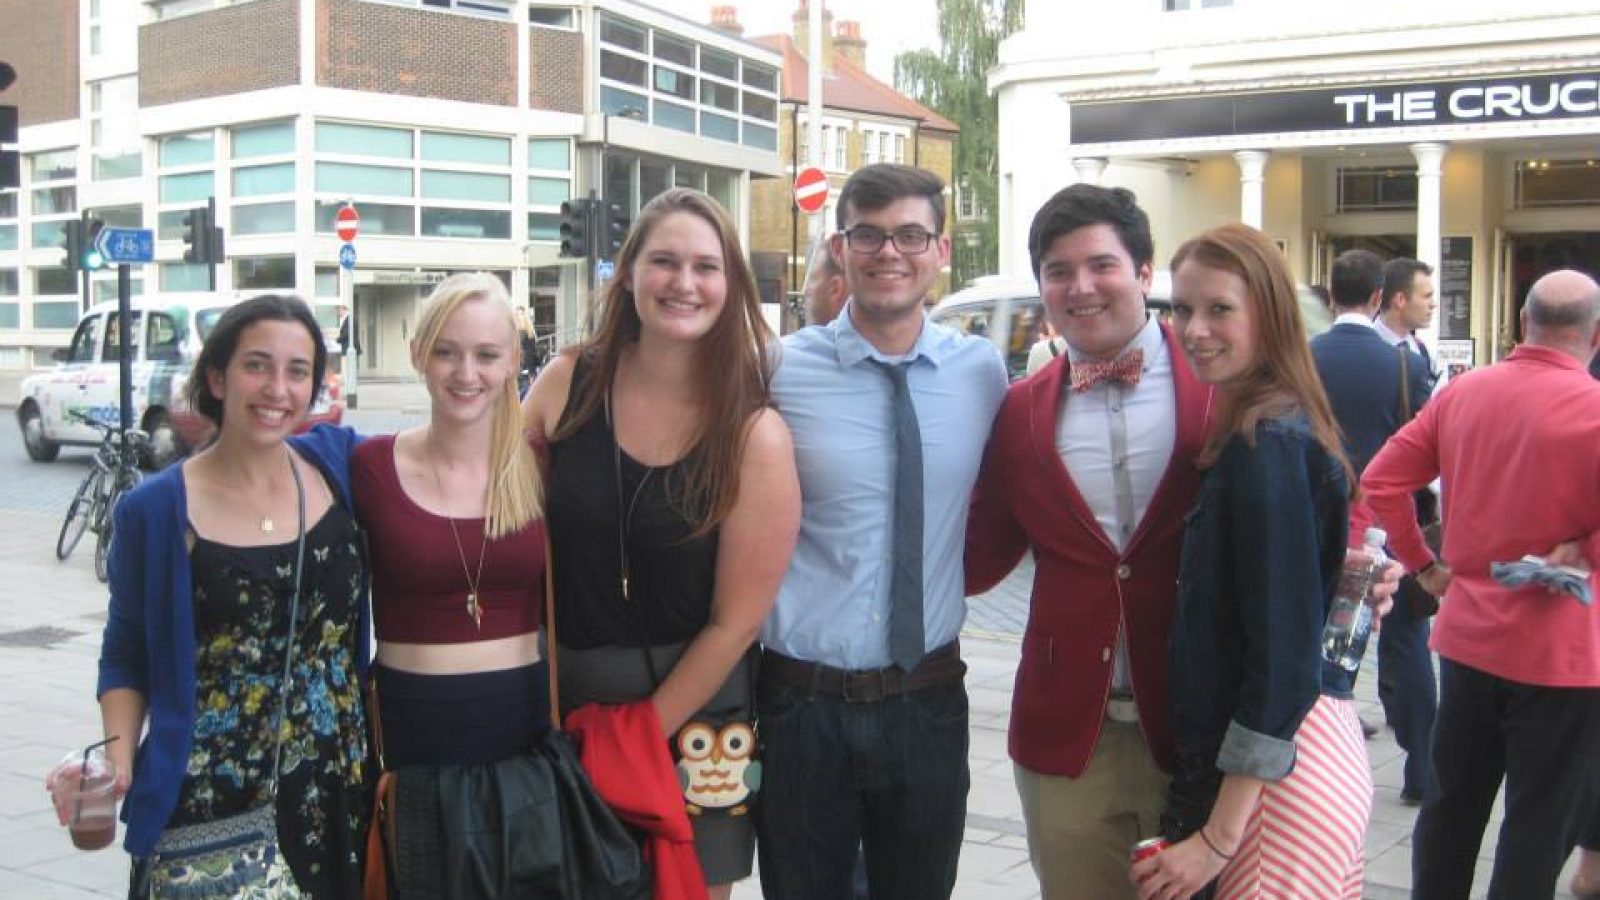 Amy Greenblott, Taylor Davis, Annie McAlpine, Trent Rowland, Michael Carozza, and Kathryn Miller at a performance of The Crucible. 